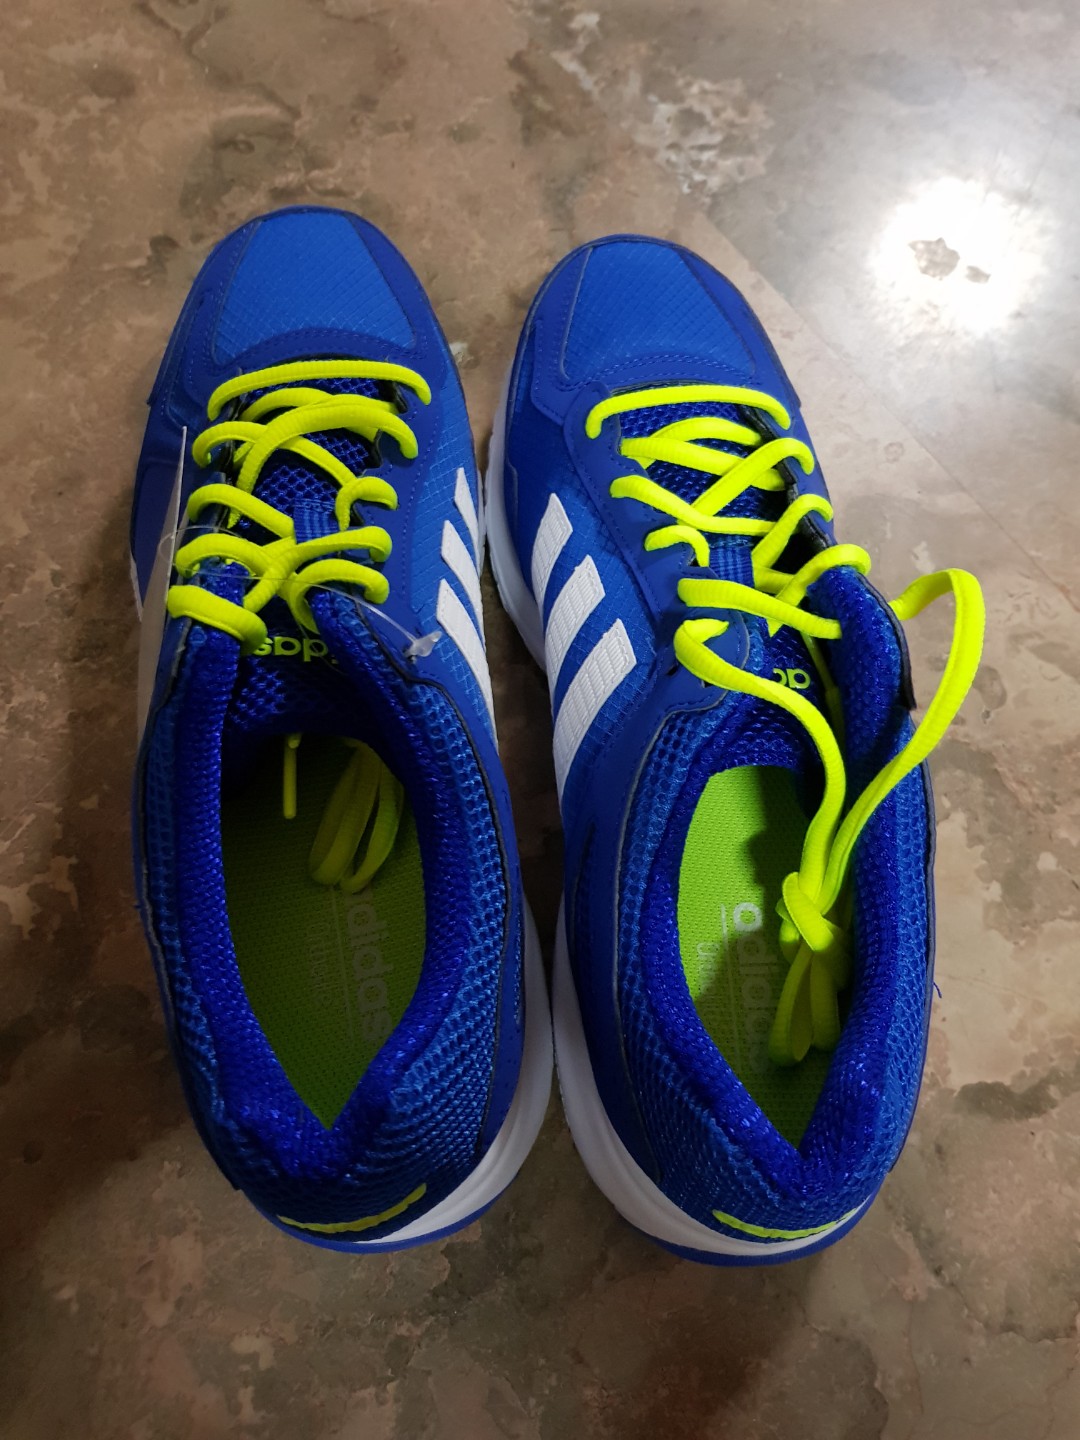 adidas blue and white running shoes